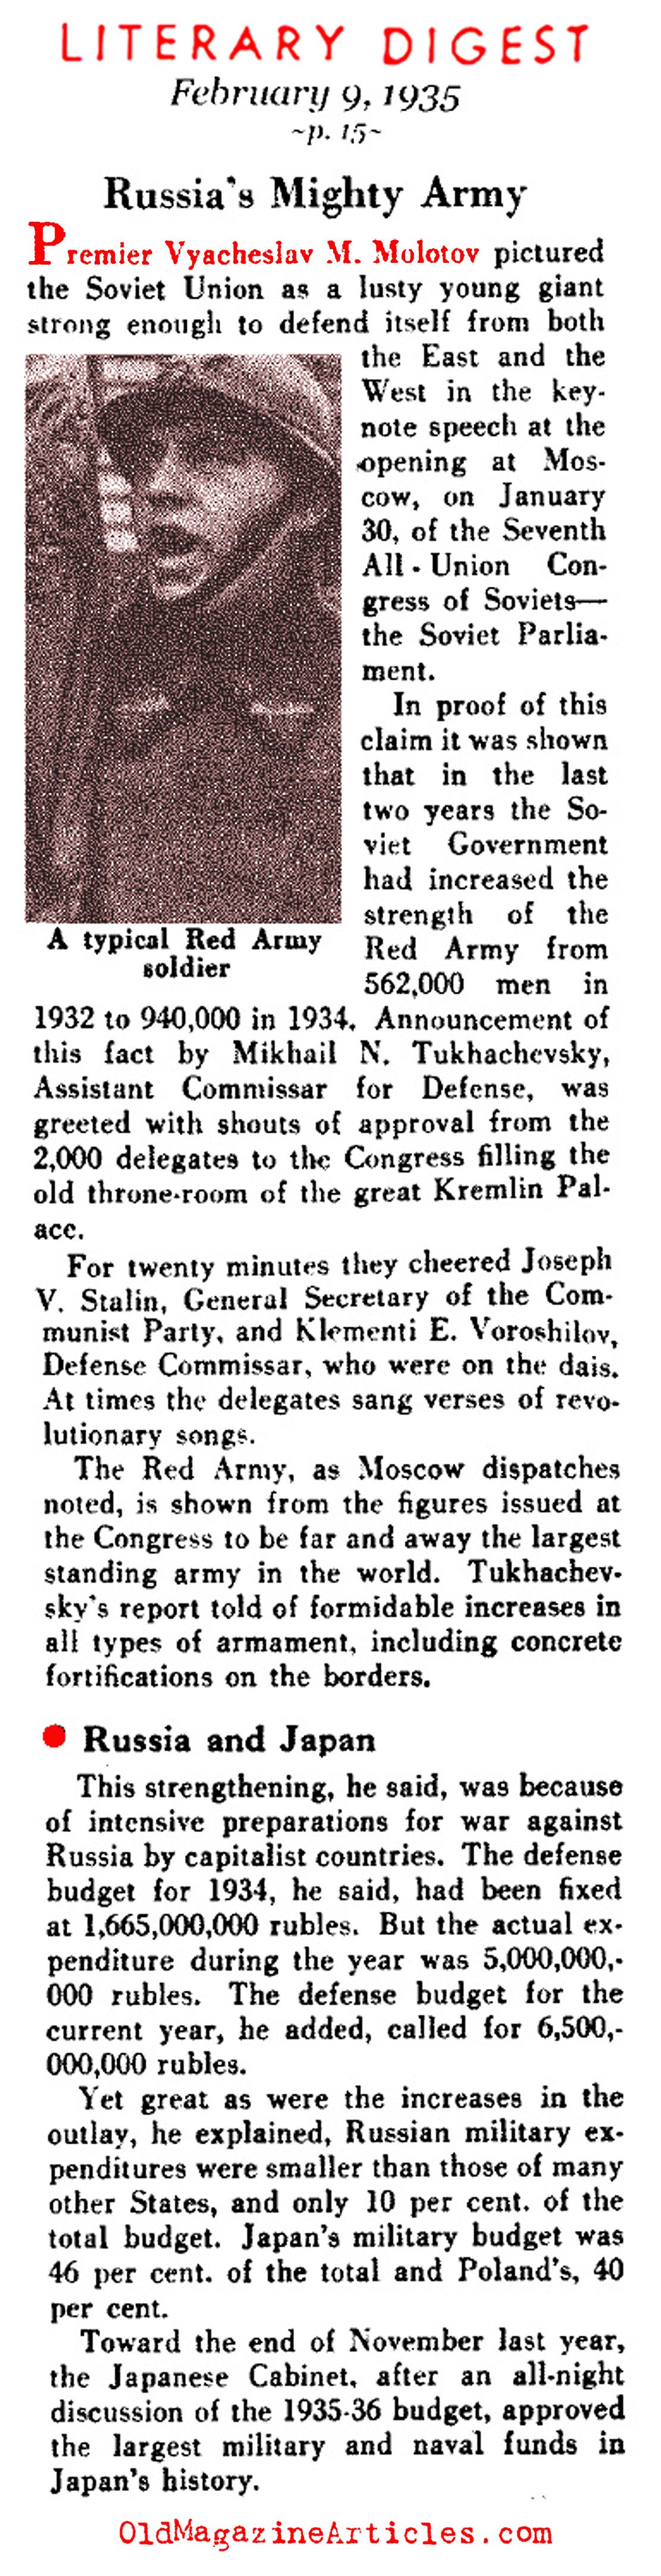  The Expansion of the Red Army (Literary Digest, 1935)